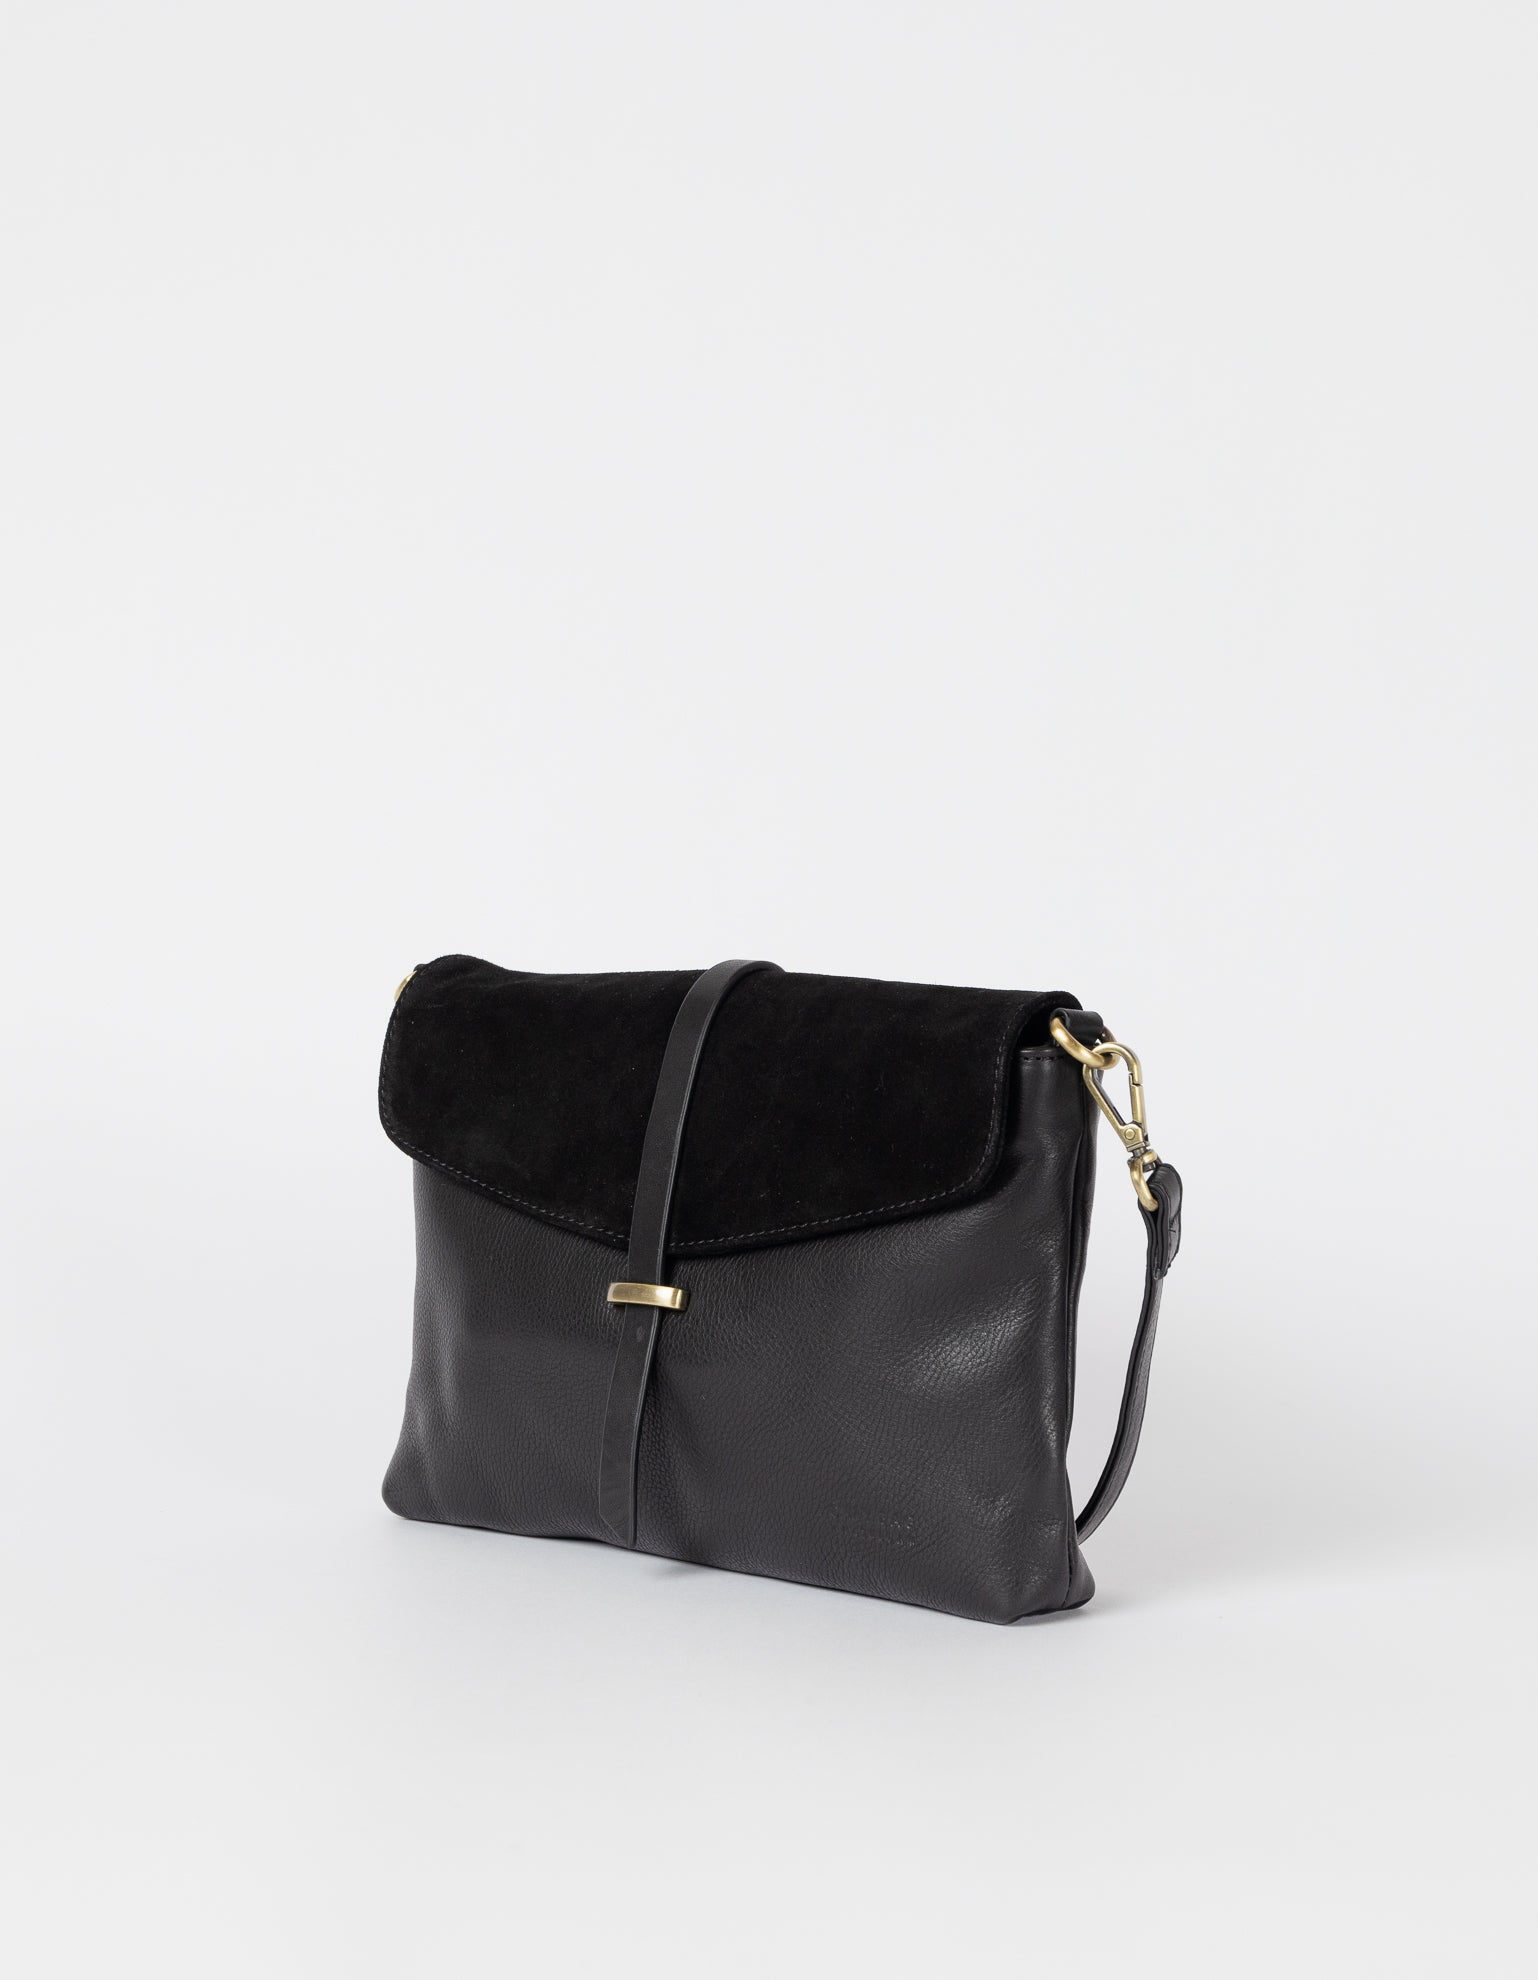 Black Soft Grain & Suede leather womens handbag. Square shape with an adjustable strap. Side product image